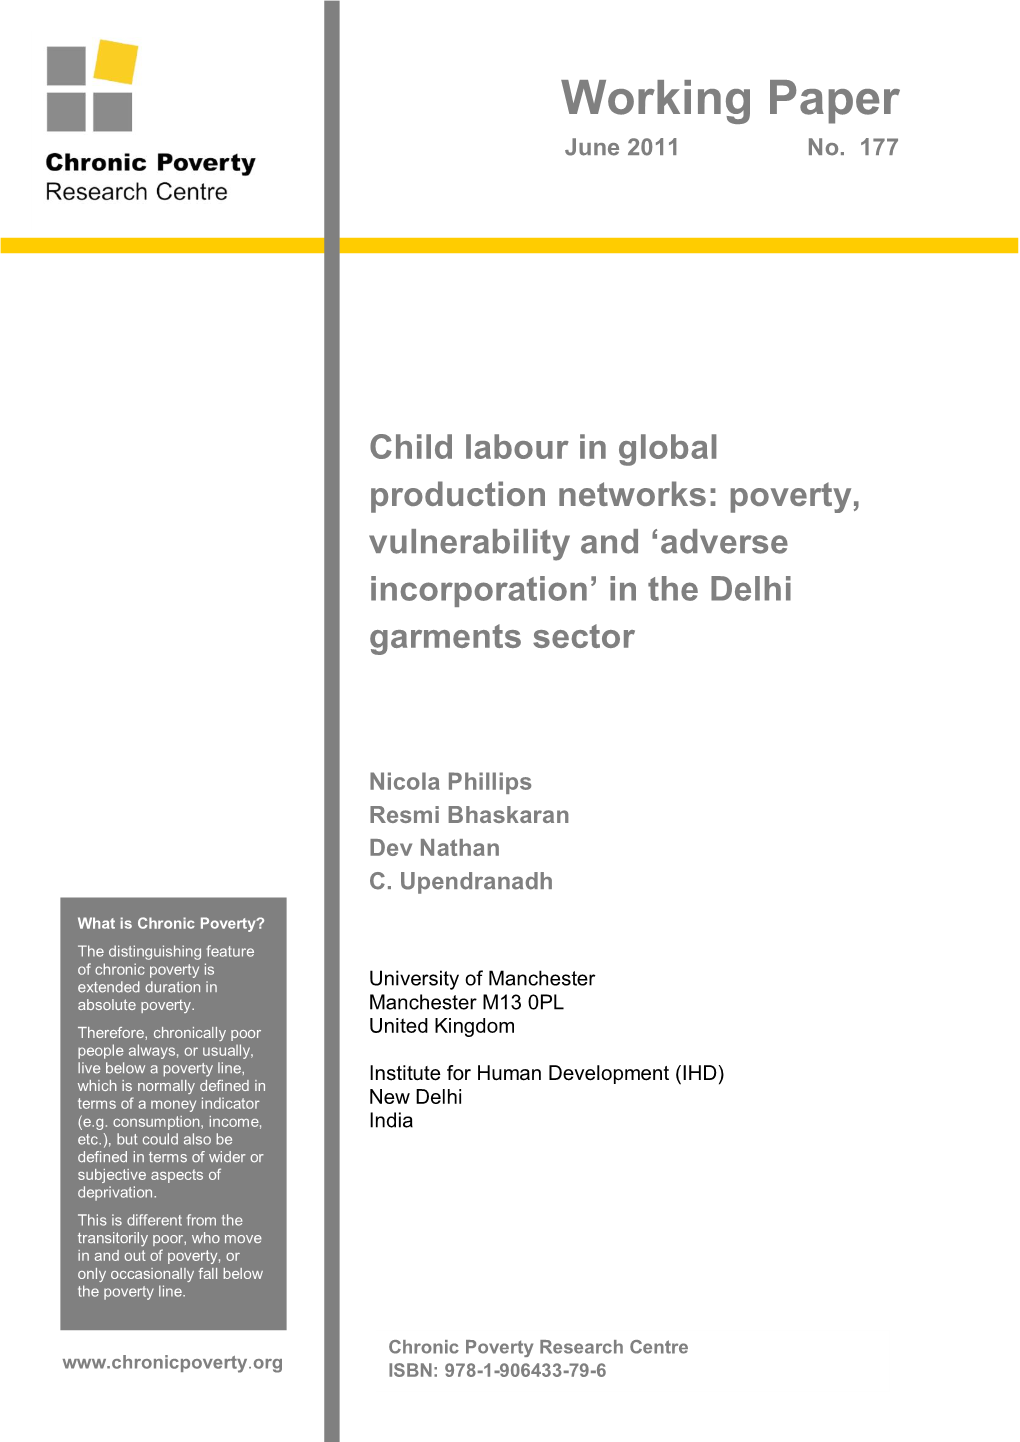 Child Labour in Global Production Networks: Poverty, Vulnerability and ‘Adverse Incorporation’ in the Delhi Garments Sector